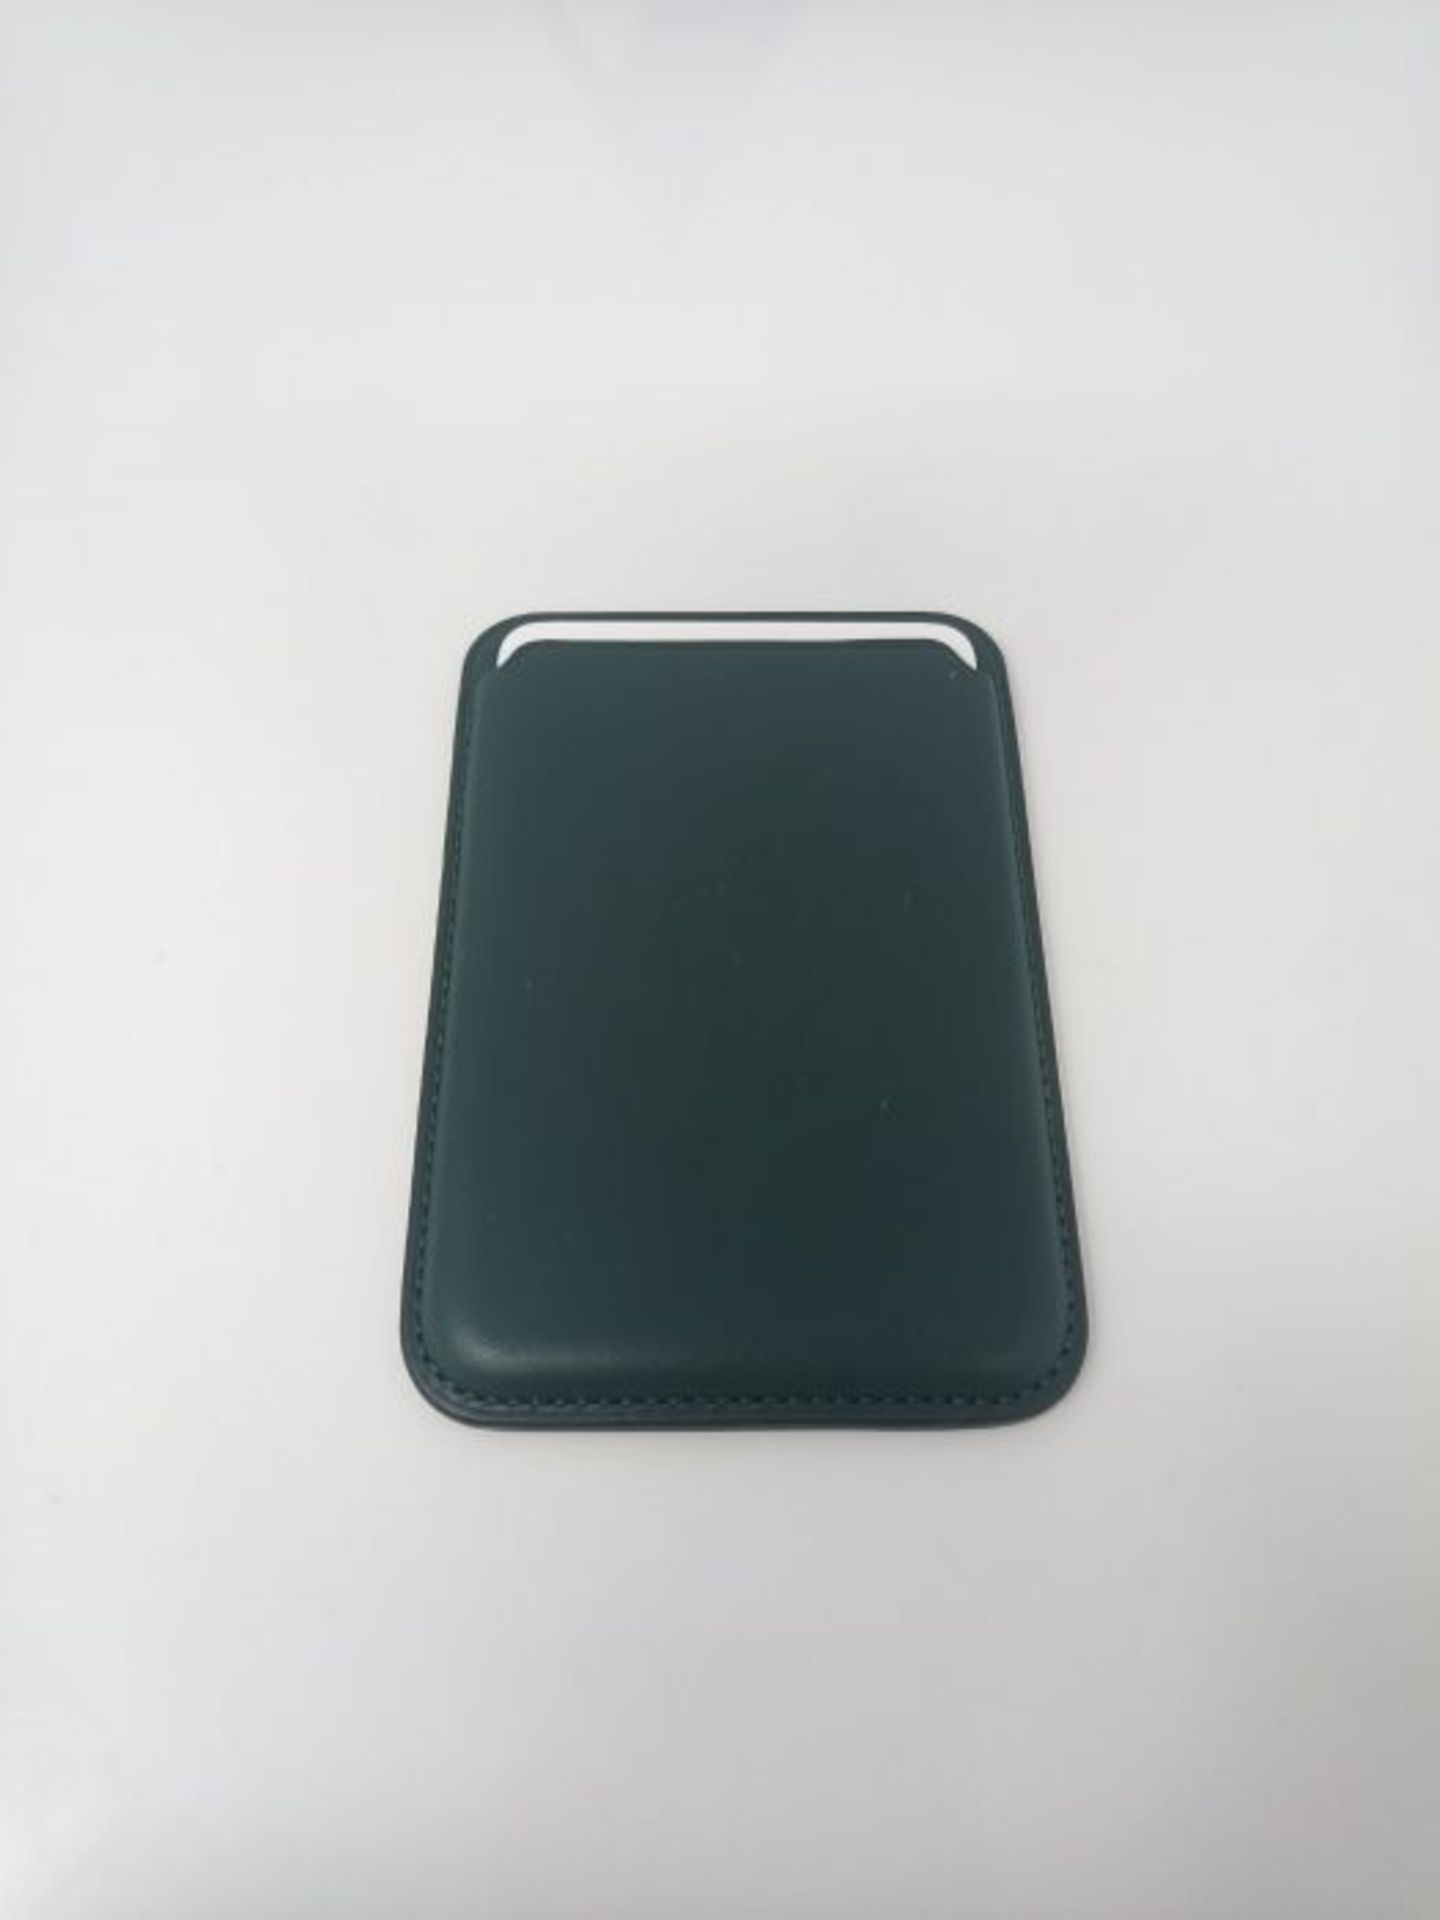 Apple Leather Wallet with MagSafe (for iPhone) - Sequoia Green - Image 3 of 3